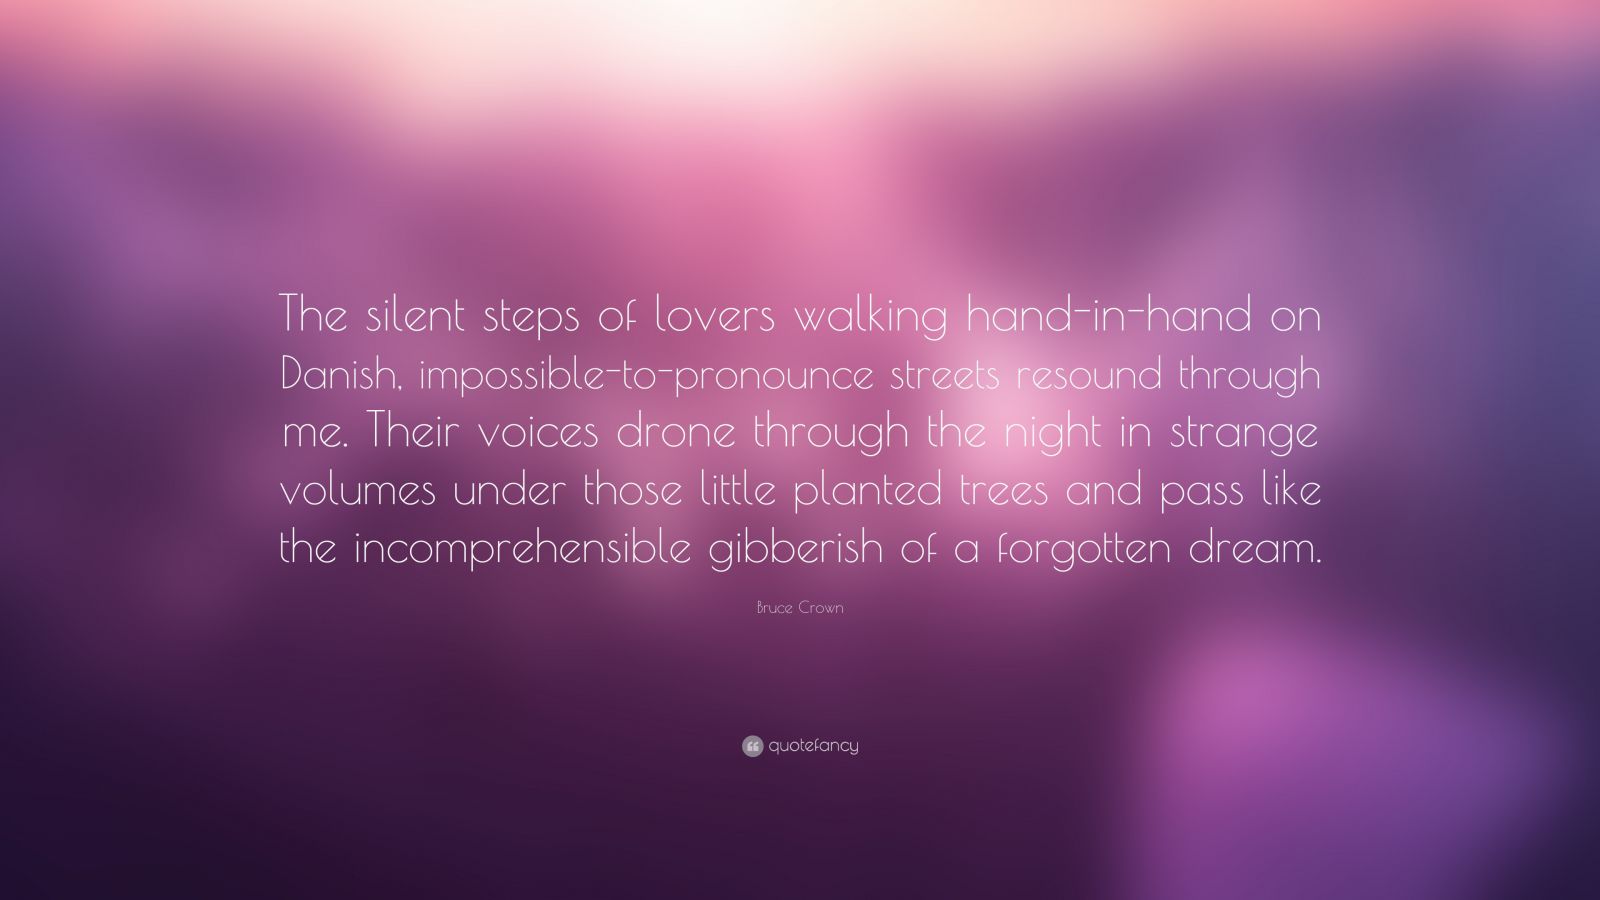 Bruce Crown Quote: “The silent steps of lovers walking hand-in-hand on ...